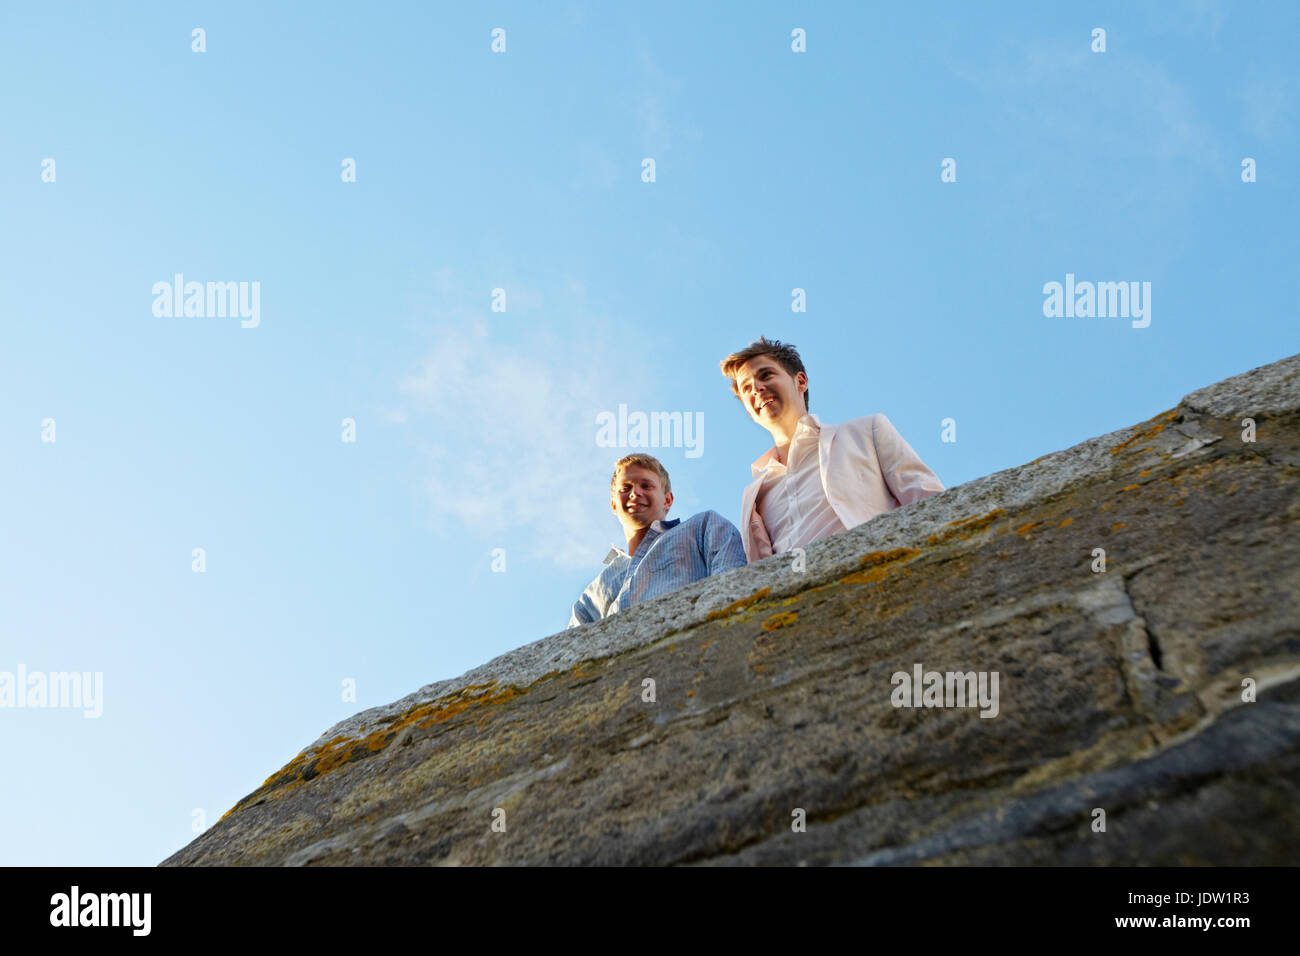 Men looking over edge of stone wall Stock Photo